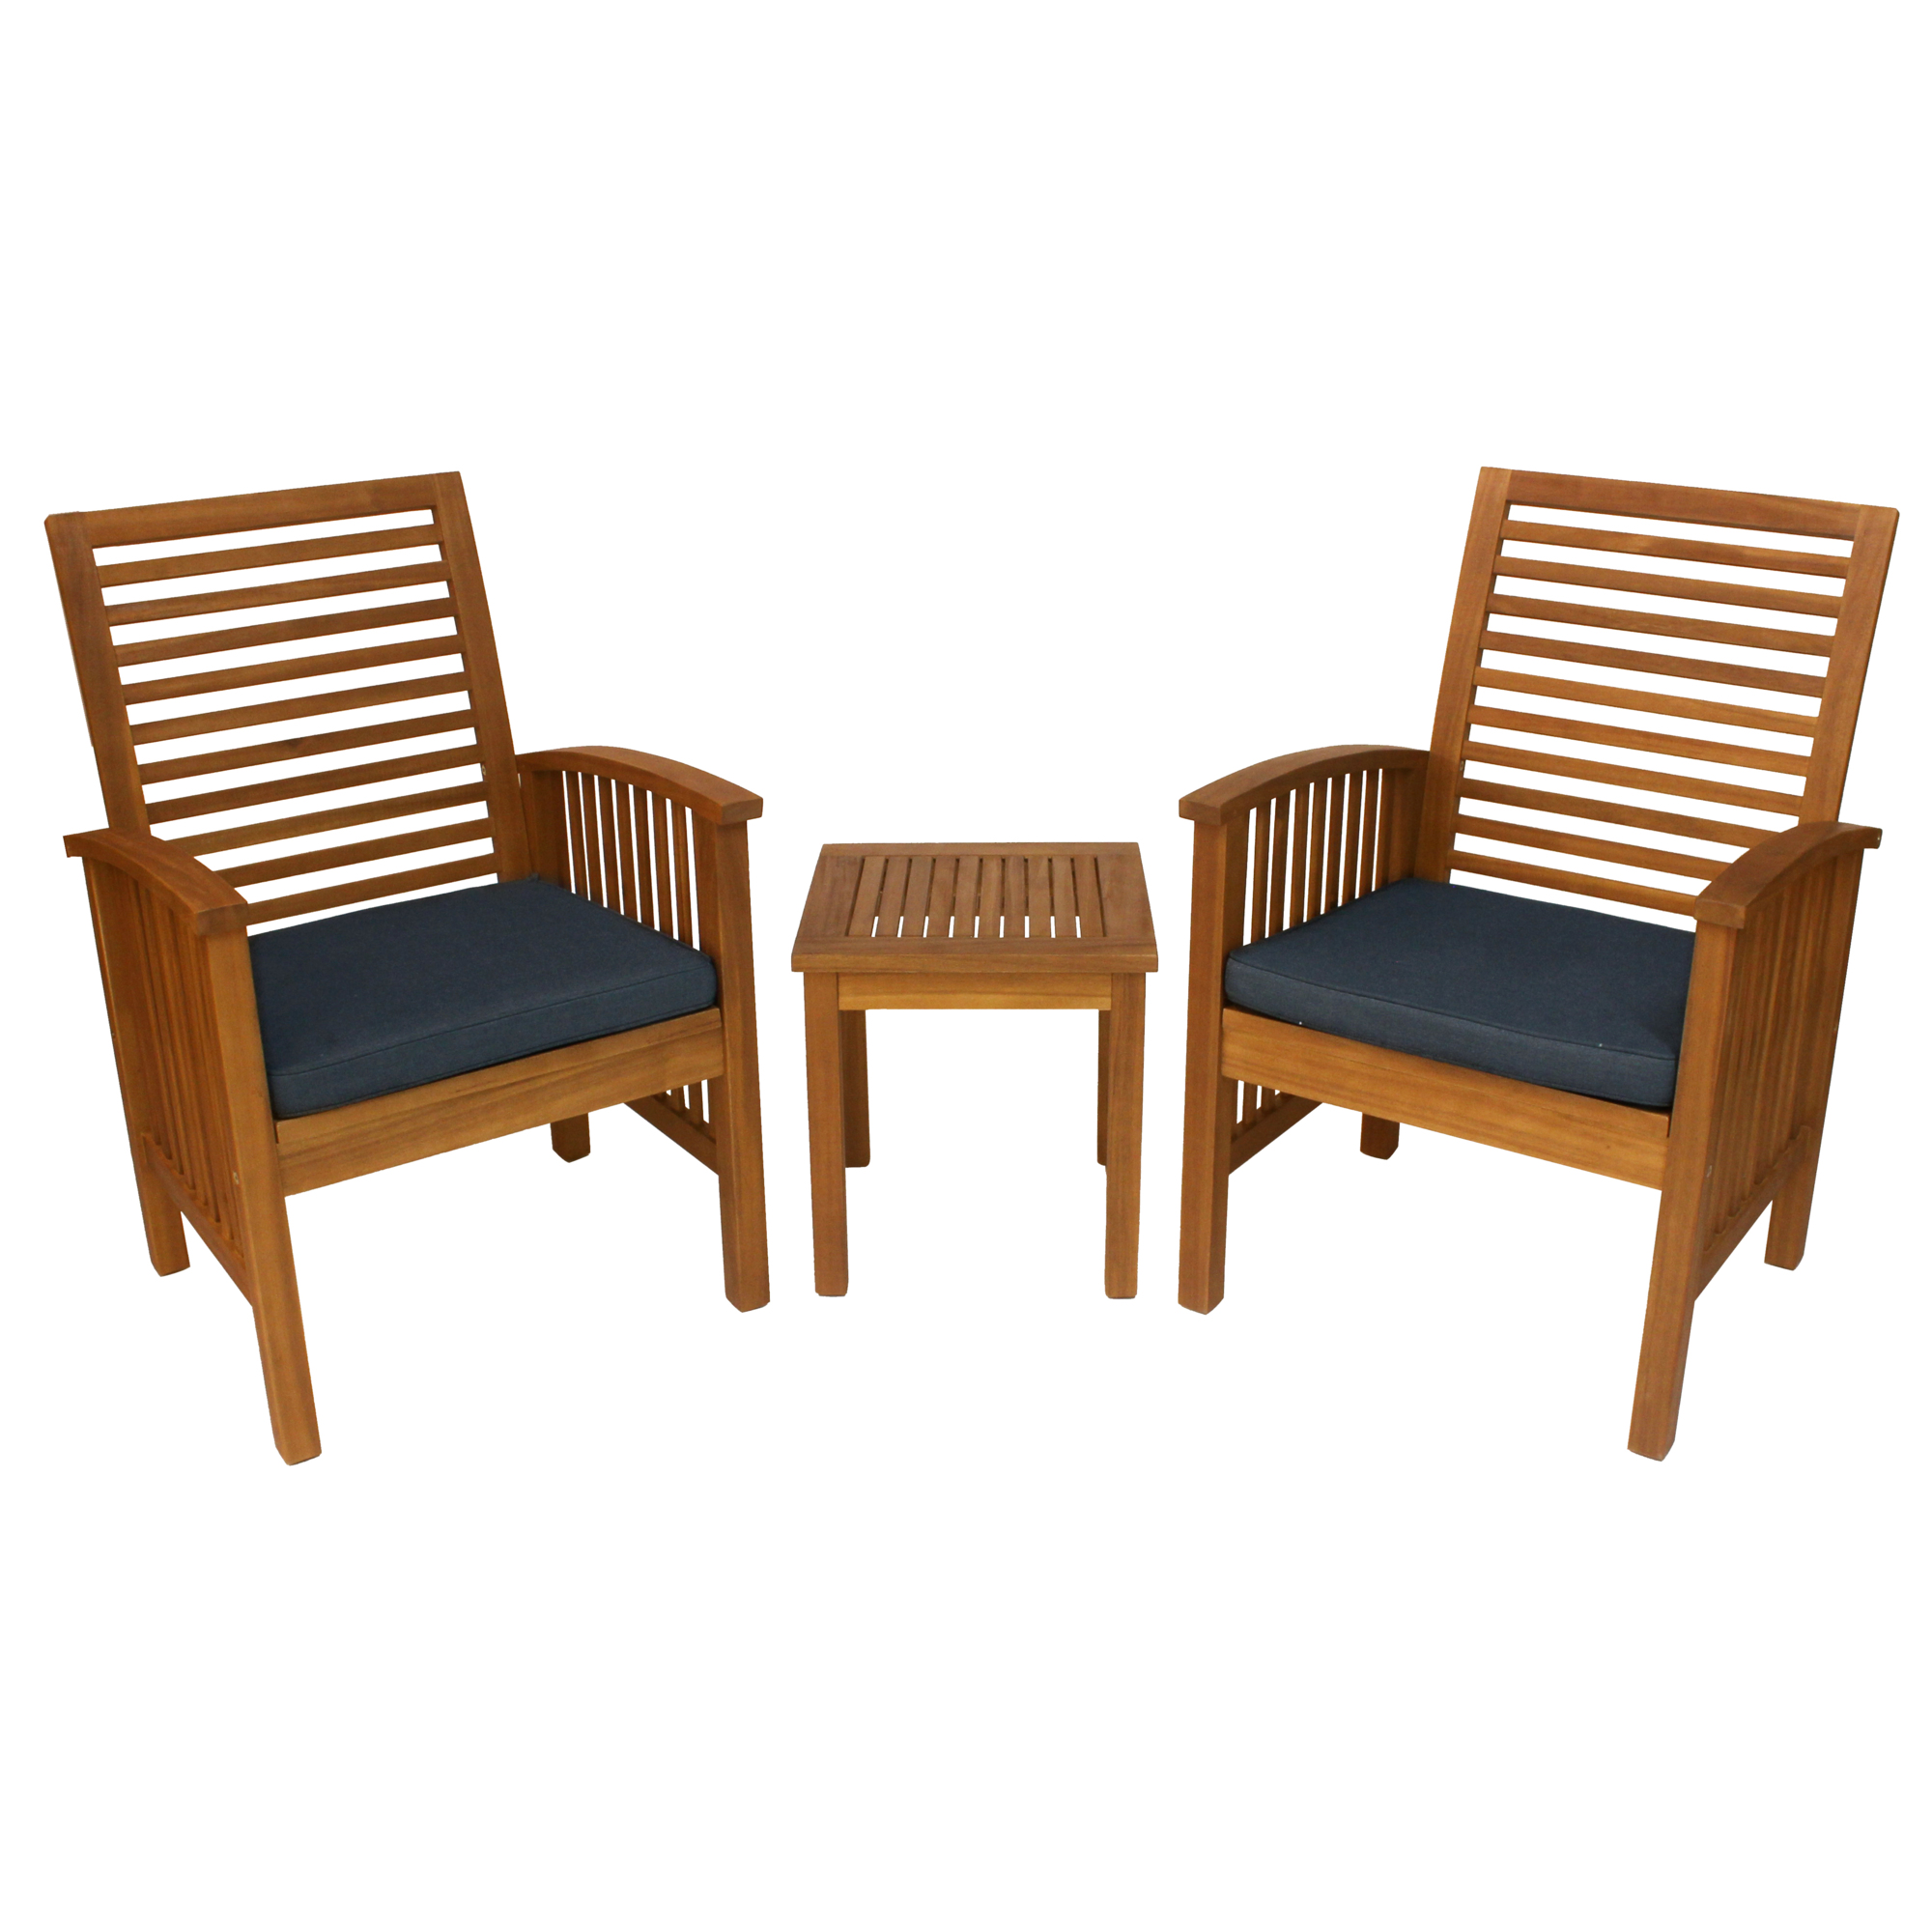 Leigh Country, Sequoia 3 Piece Conversation Set, Pieces (qty.) 3, Primary Color Brown, Seating Capacity 2, Model TX 36432